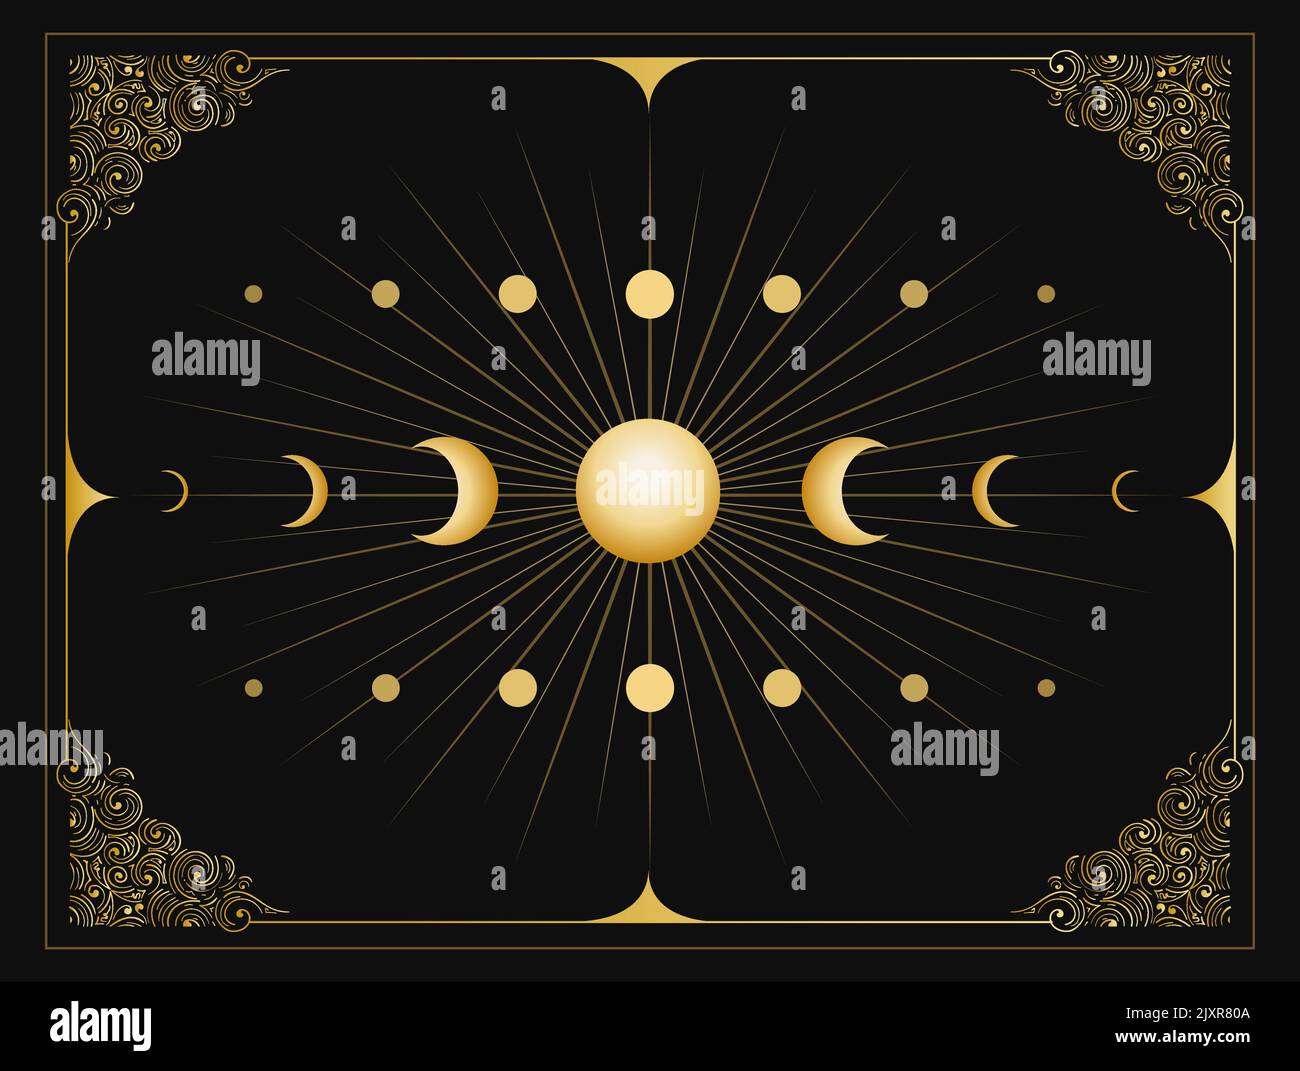 Moon Phases Medieval Esoteric Emblem. Vector Illustration on Black Background Stock Vector